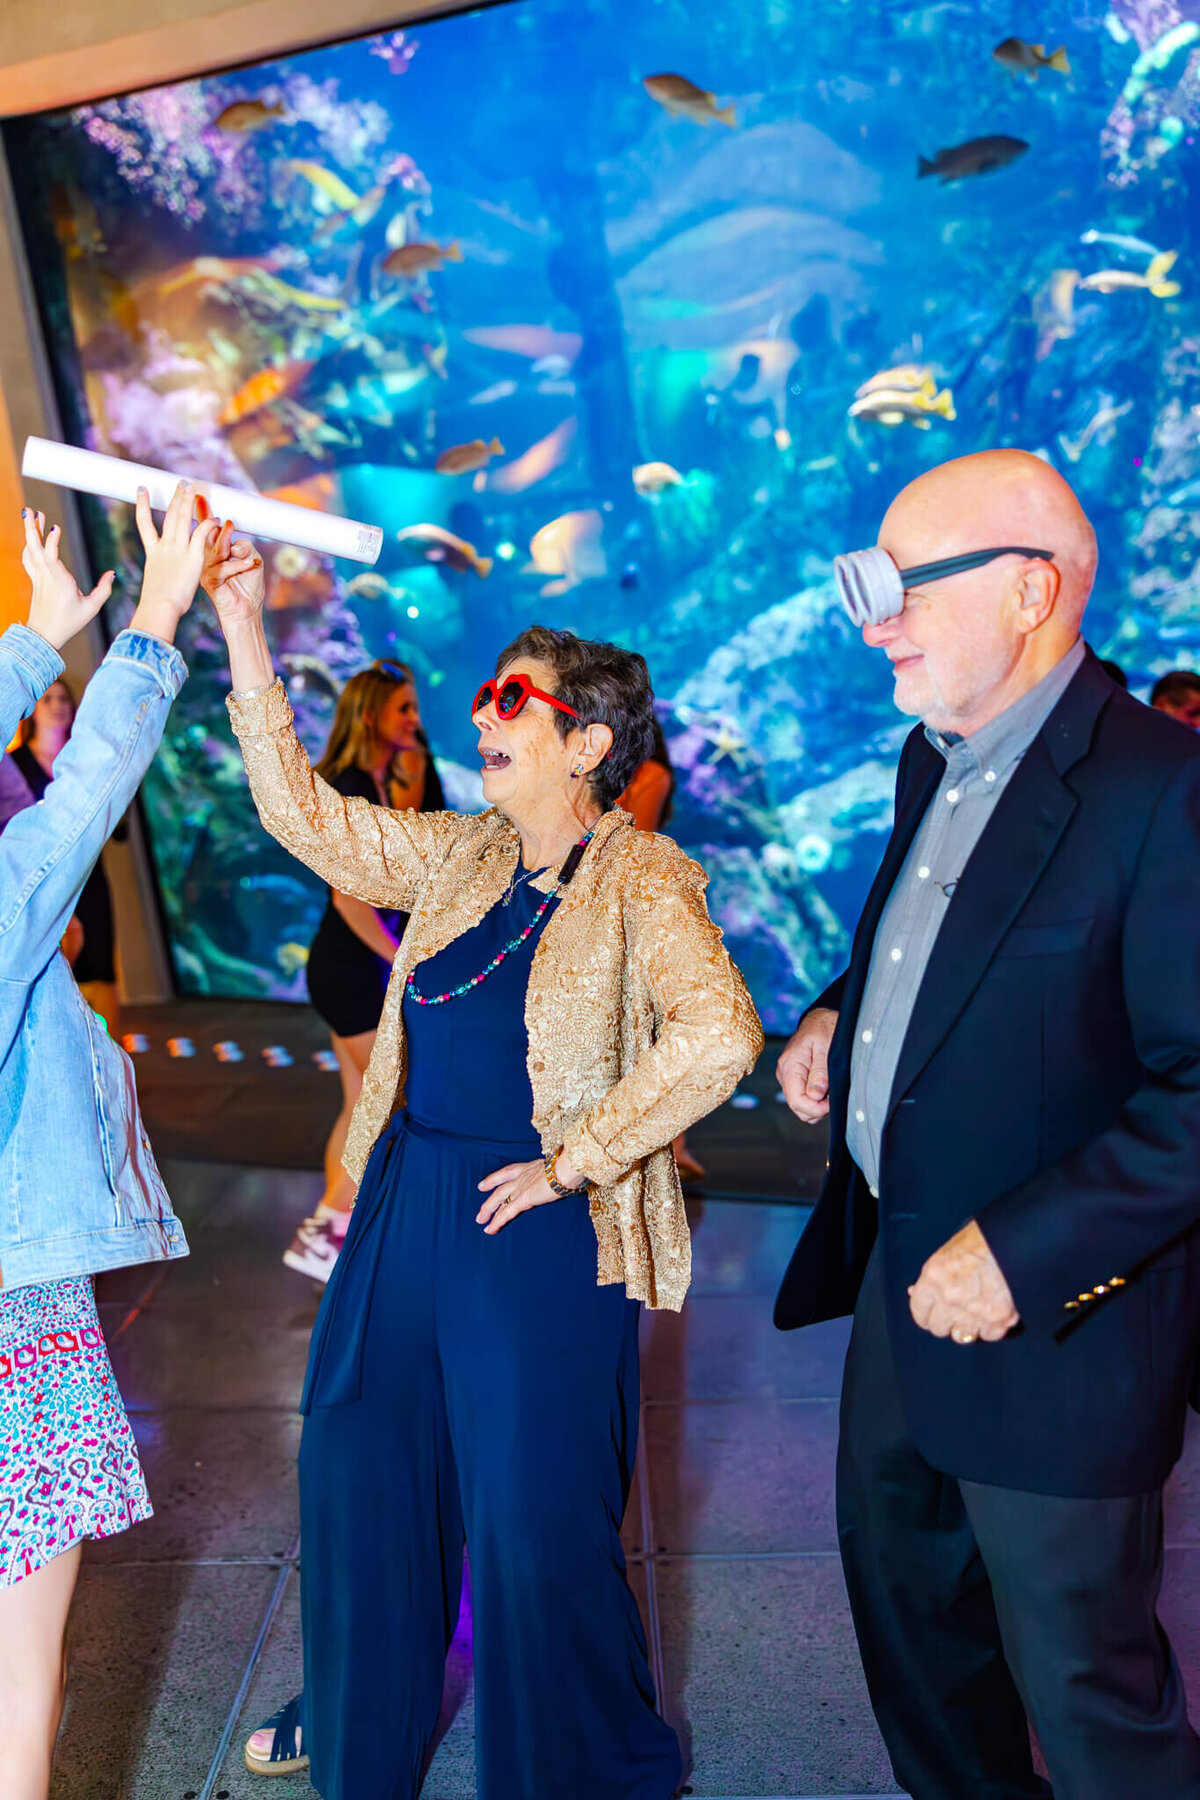 A woman in a blue suit and gold jacket dances with light tubes and big sunglasses at an aquaarium